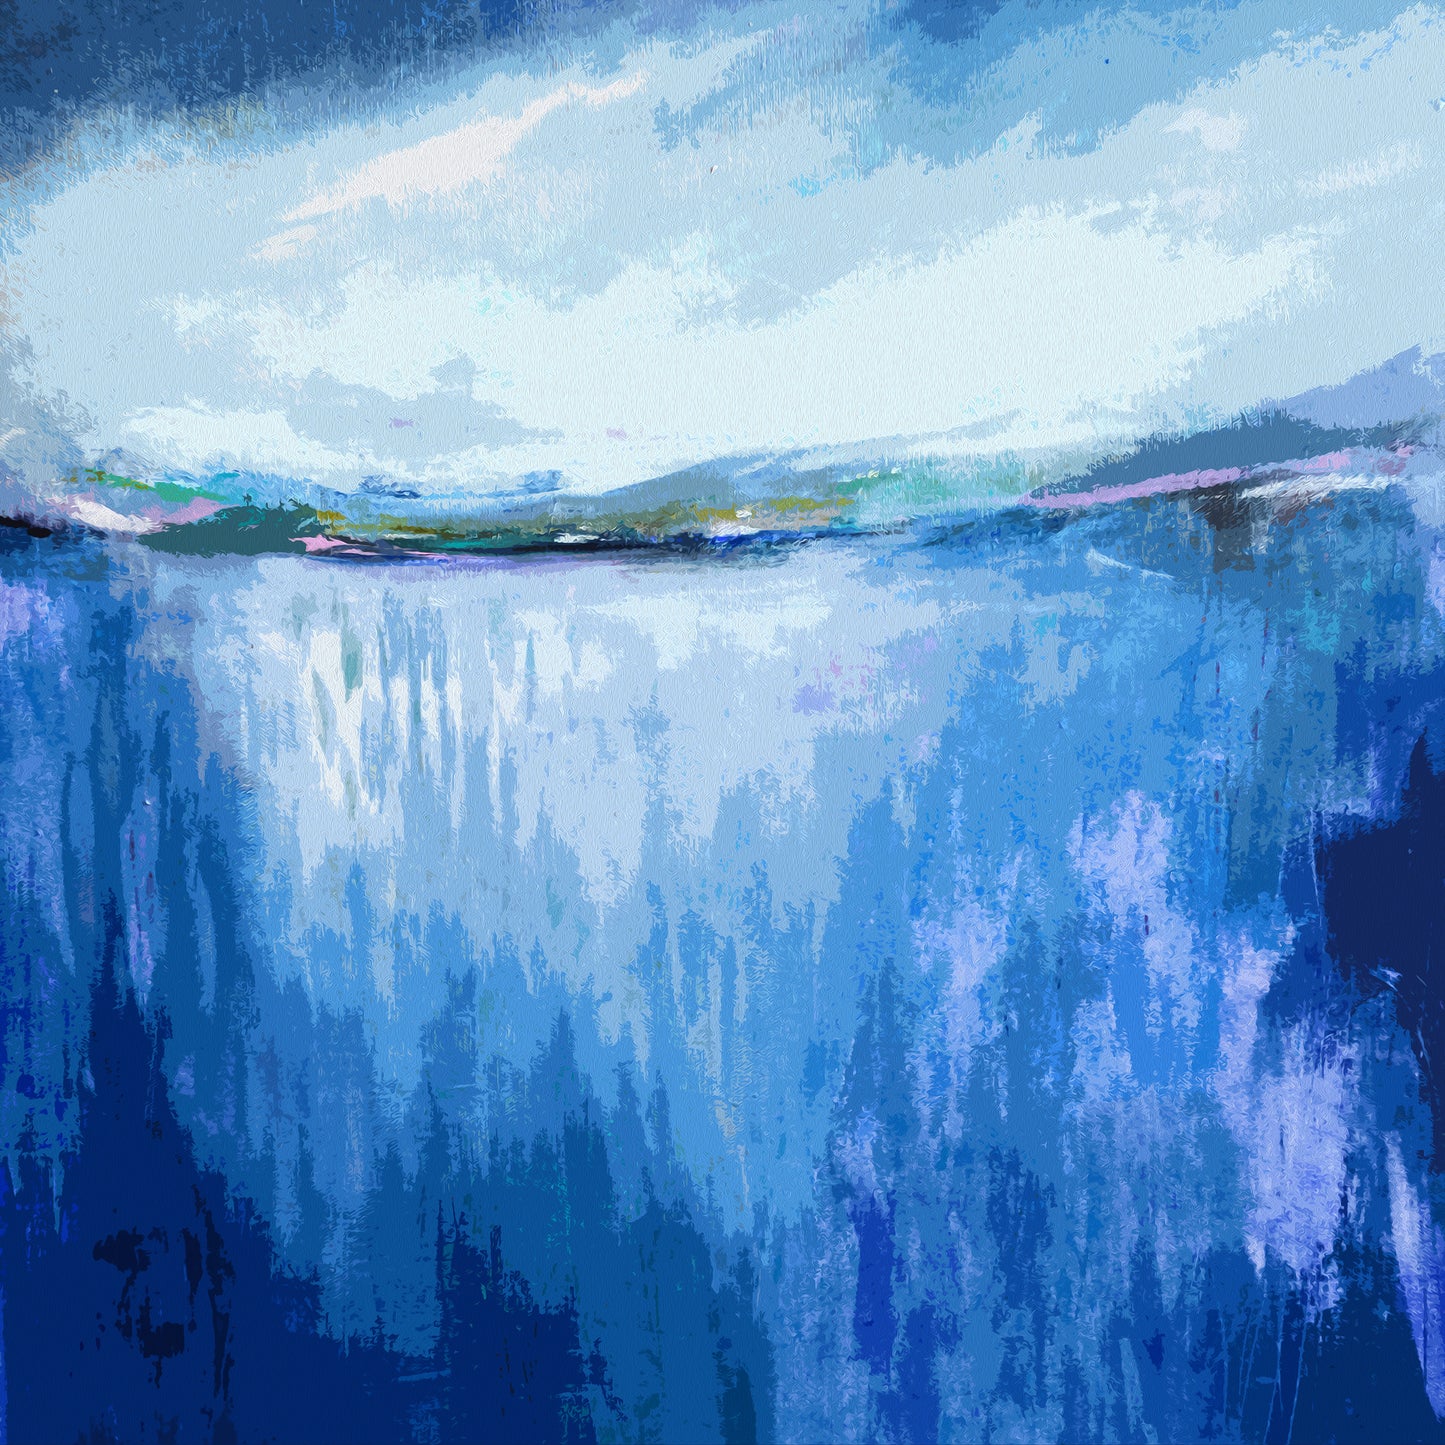 Blue Abstract Landscape Wall Art Print on Stretched Canvas or Fine Art Paper